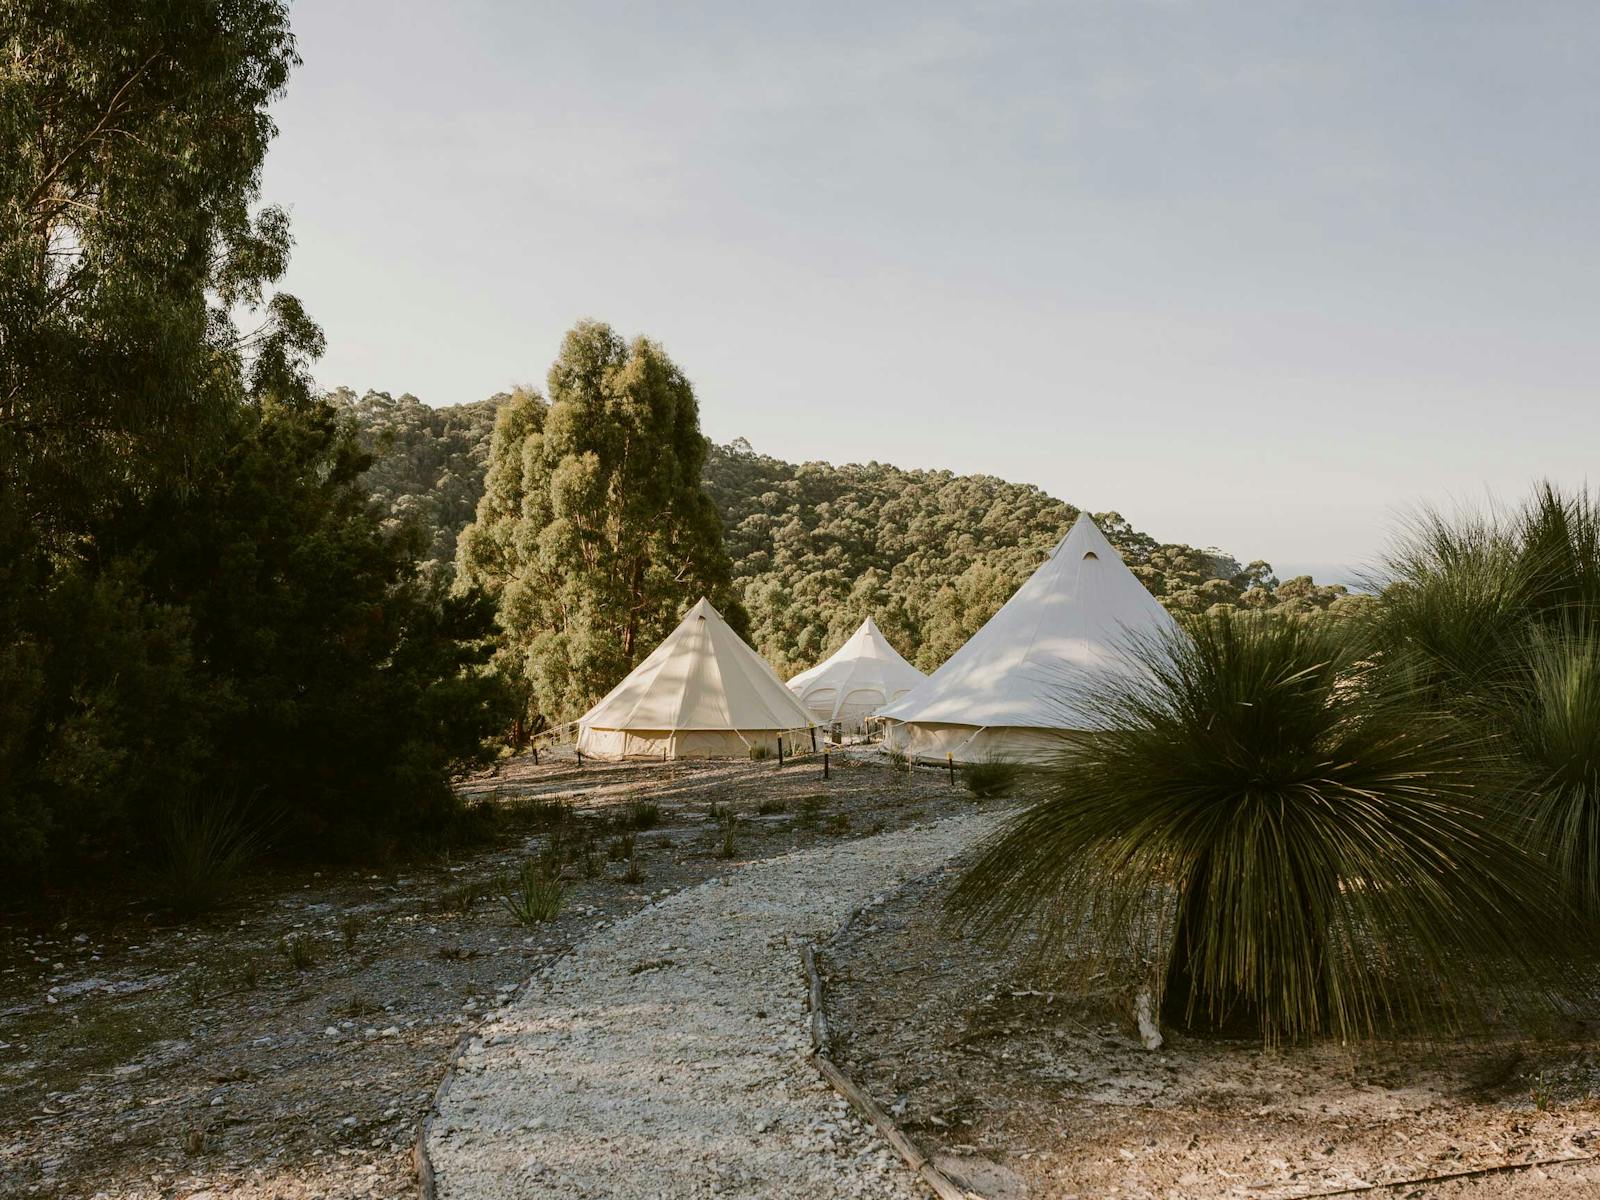 Follow the flora surrounded paths to the tents.